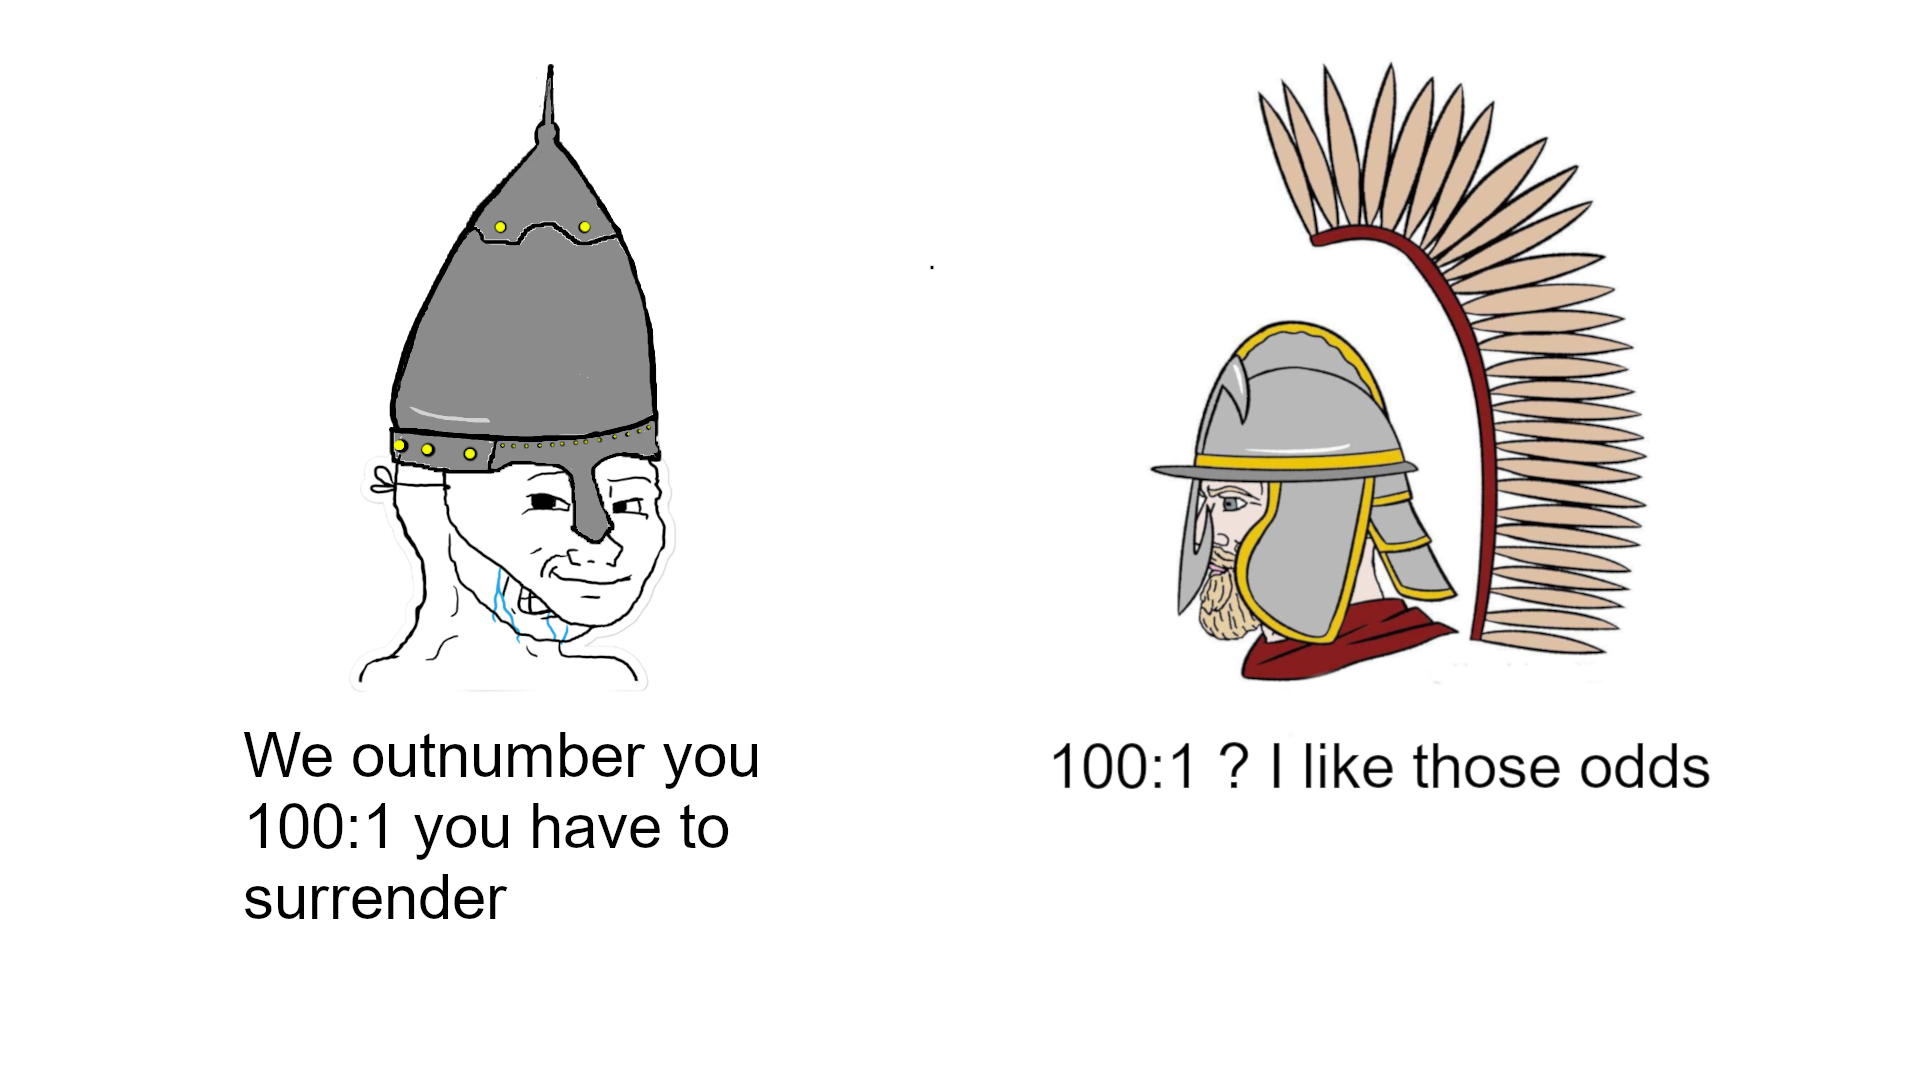 Poles and the Battle of Hodow (Winged Hussars)